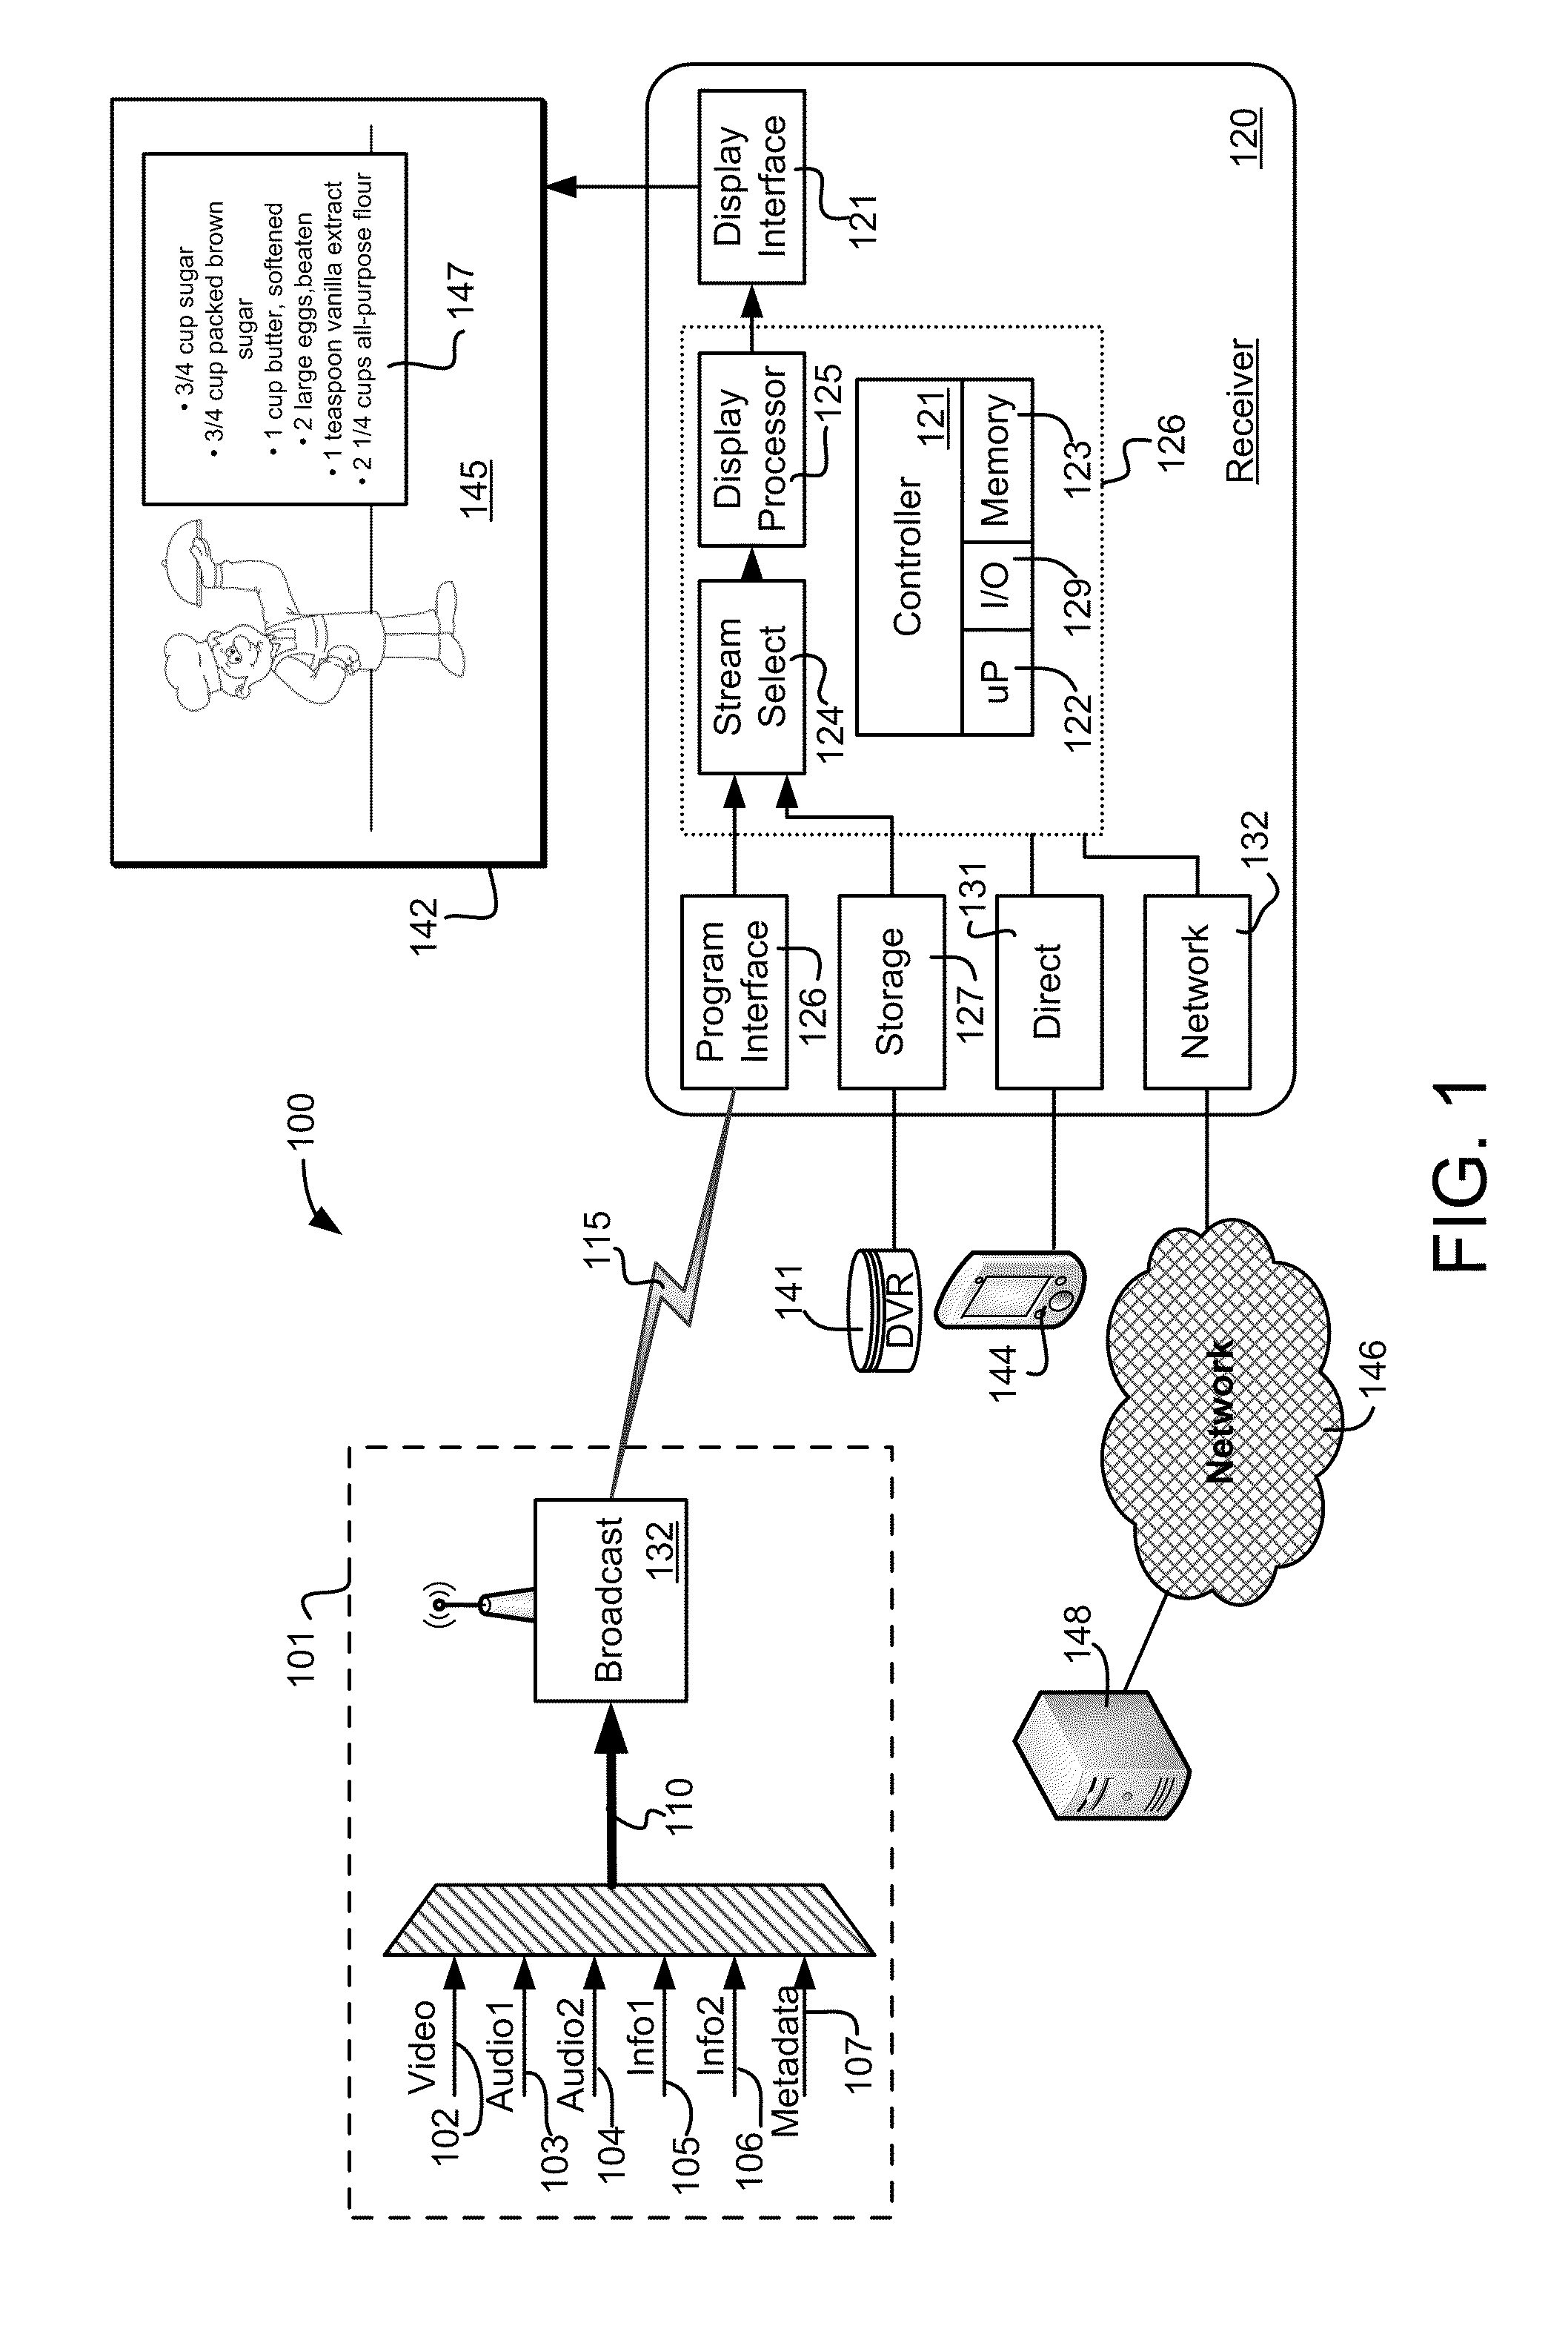 Systems and methods for processing supplemental information associated with media programming